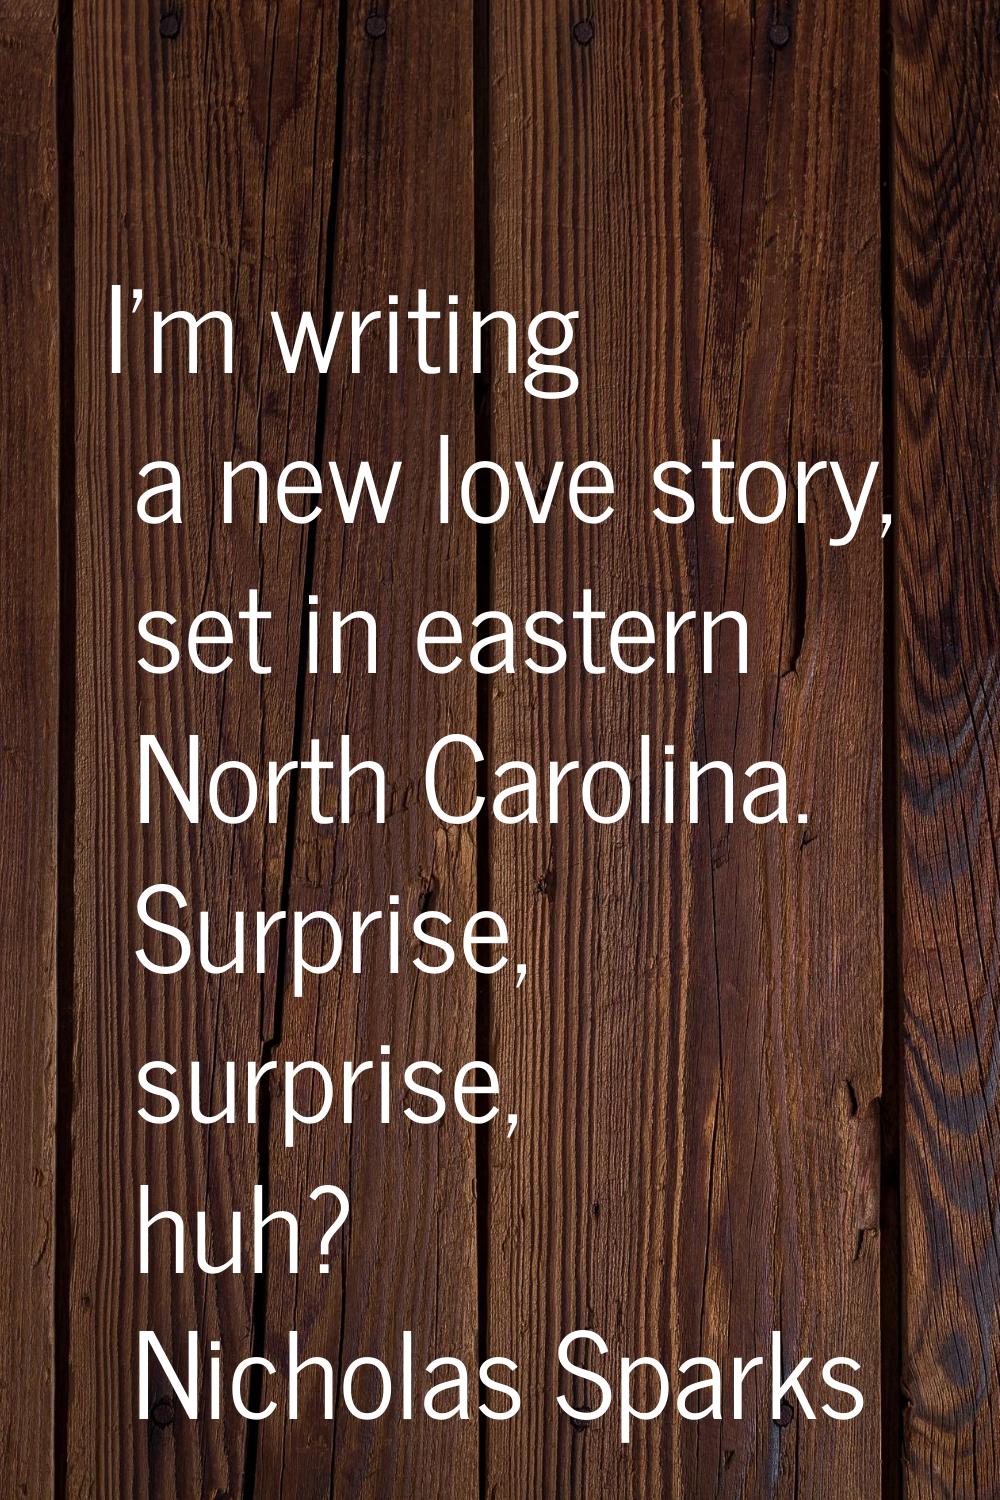 I'm writing a new love story, set in eastern North Carolina. Surprise, surprise, huh?